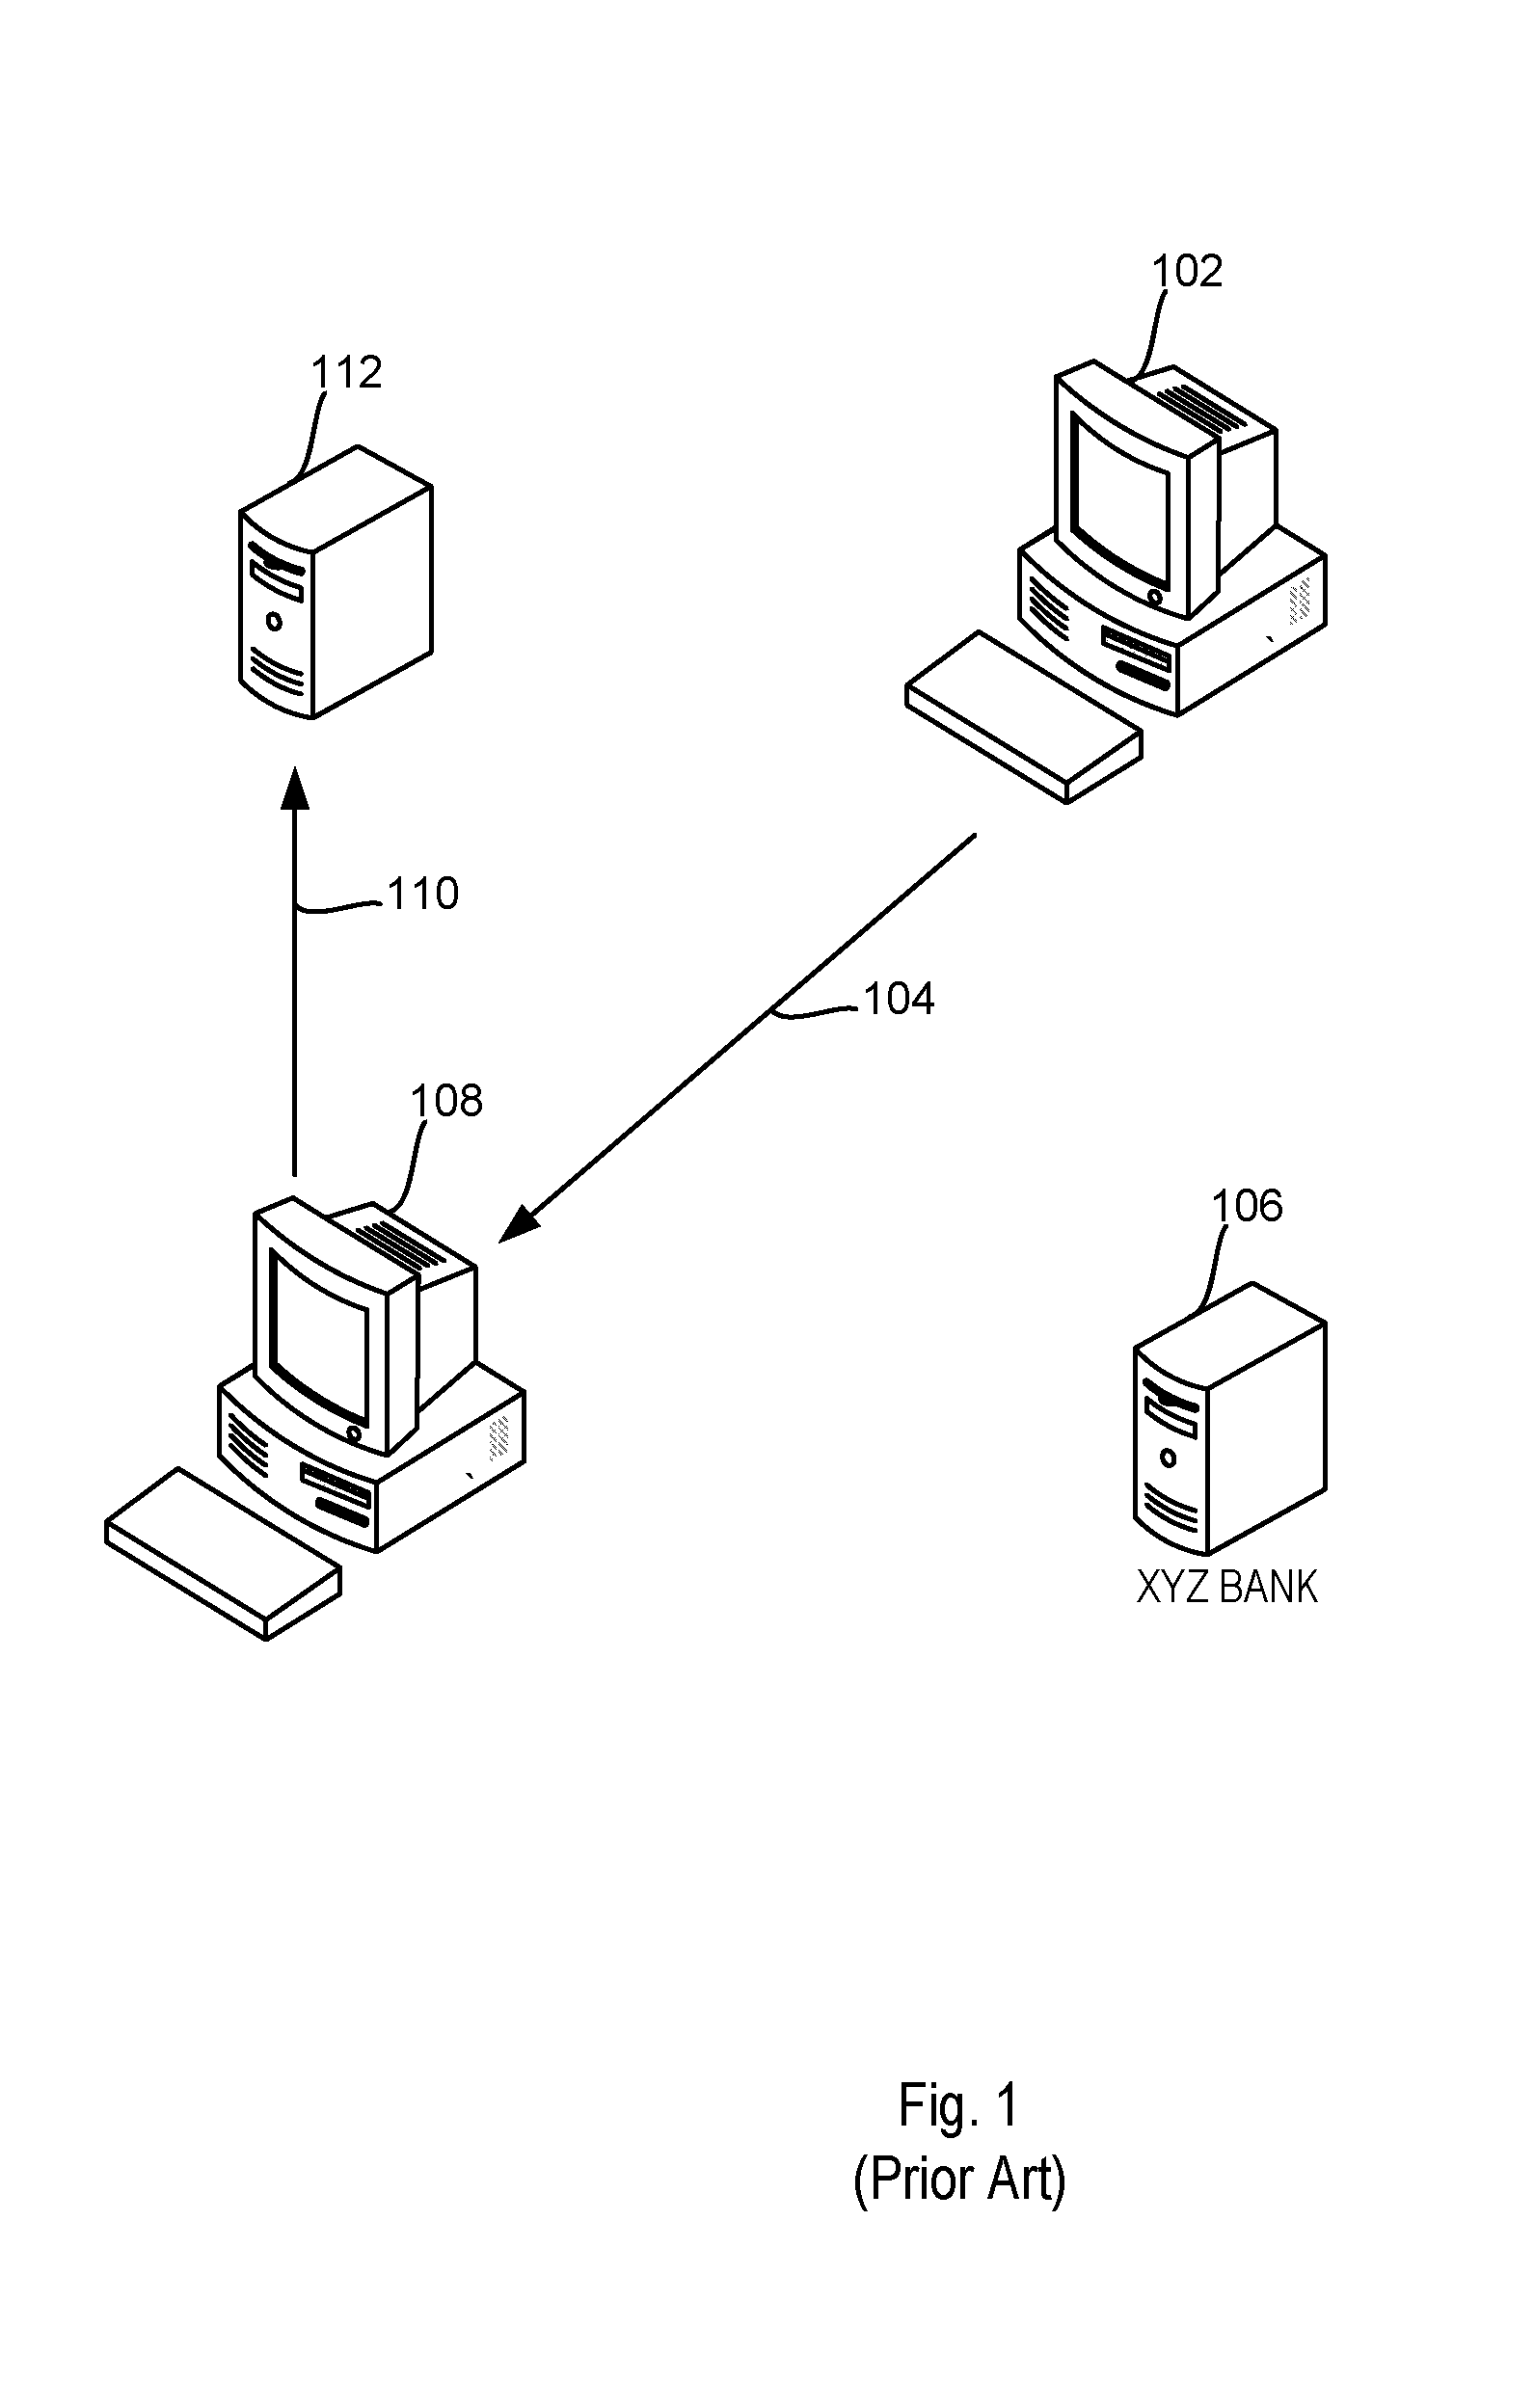 Dynamic phishing detection methods and apparatus